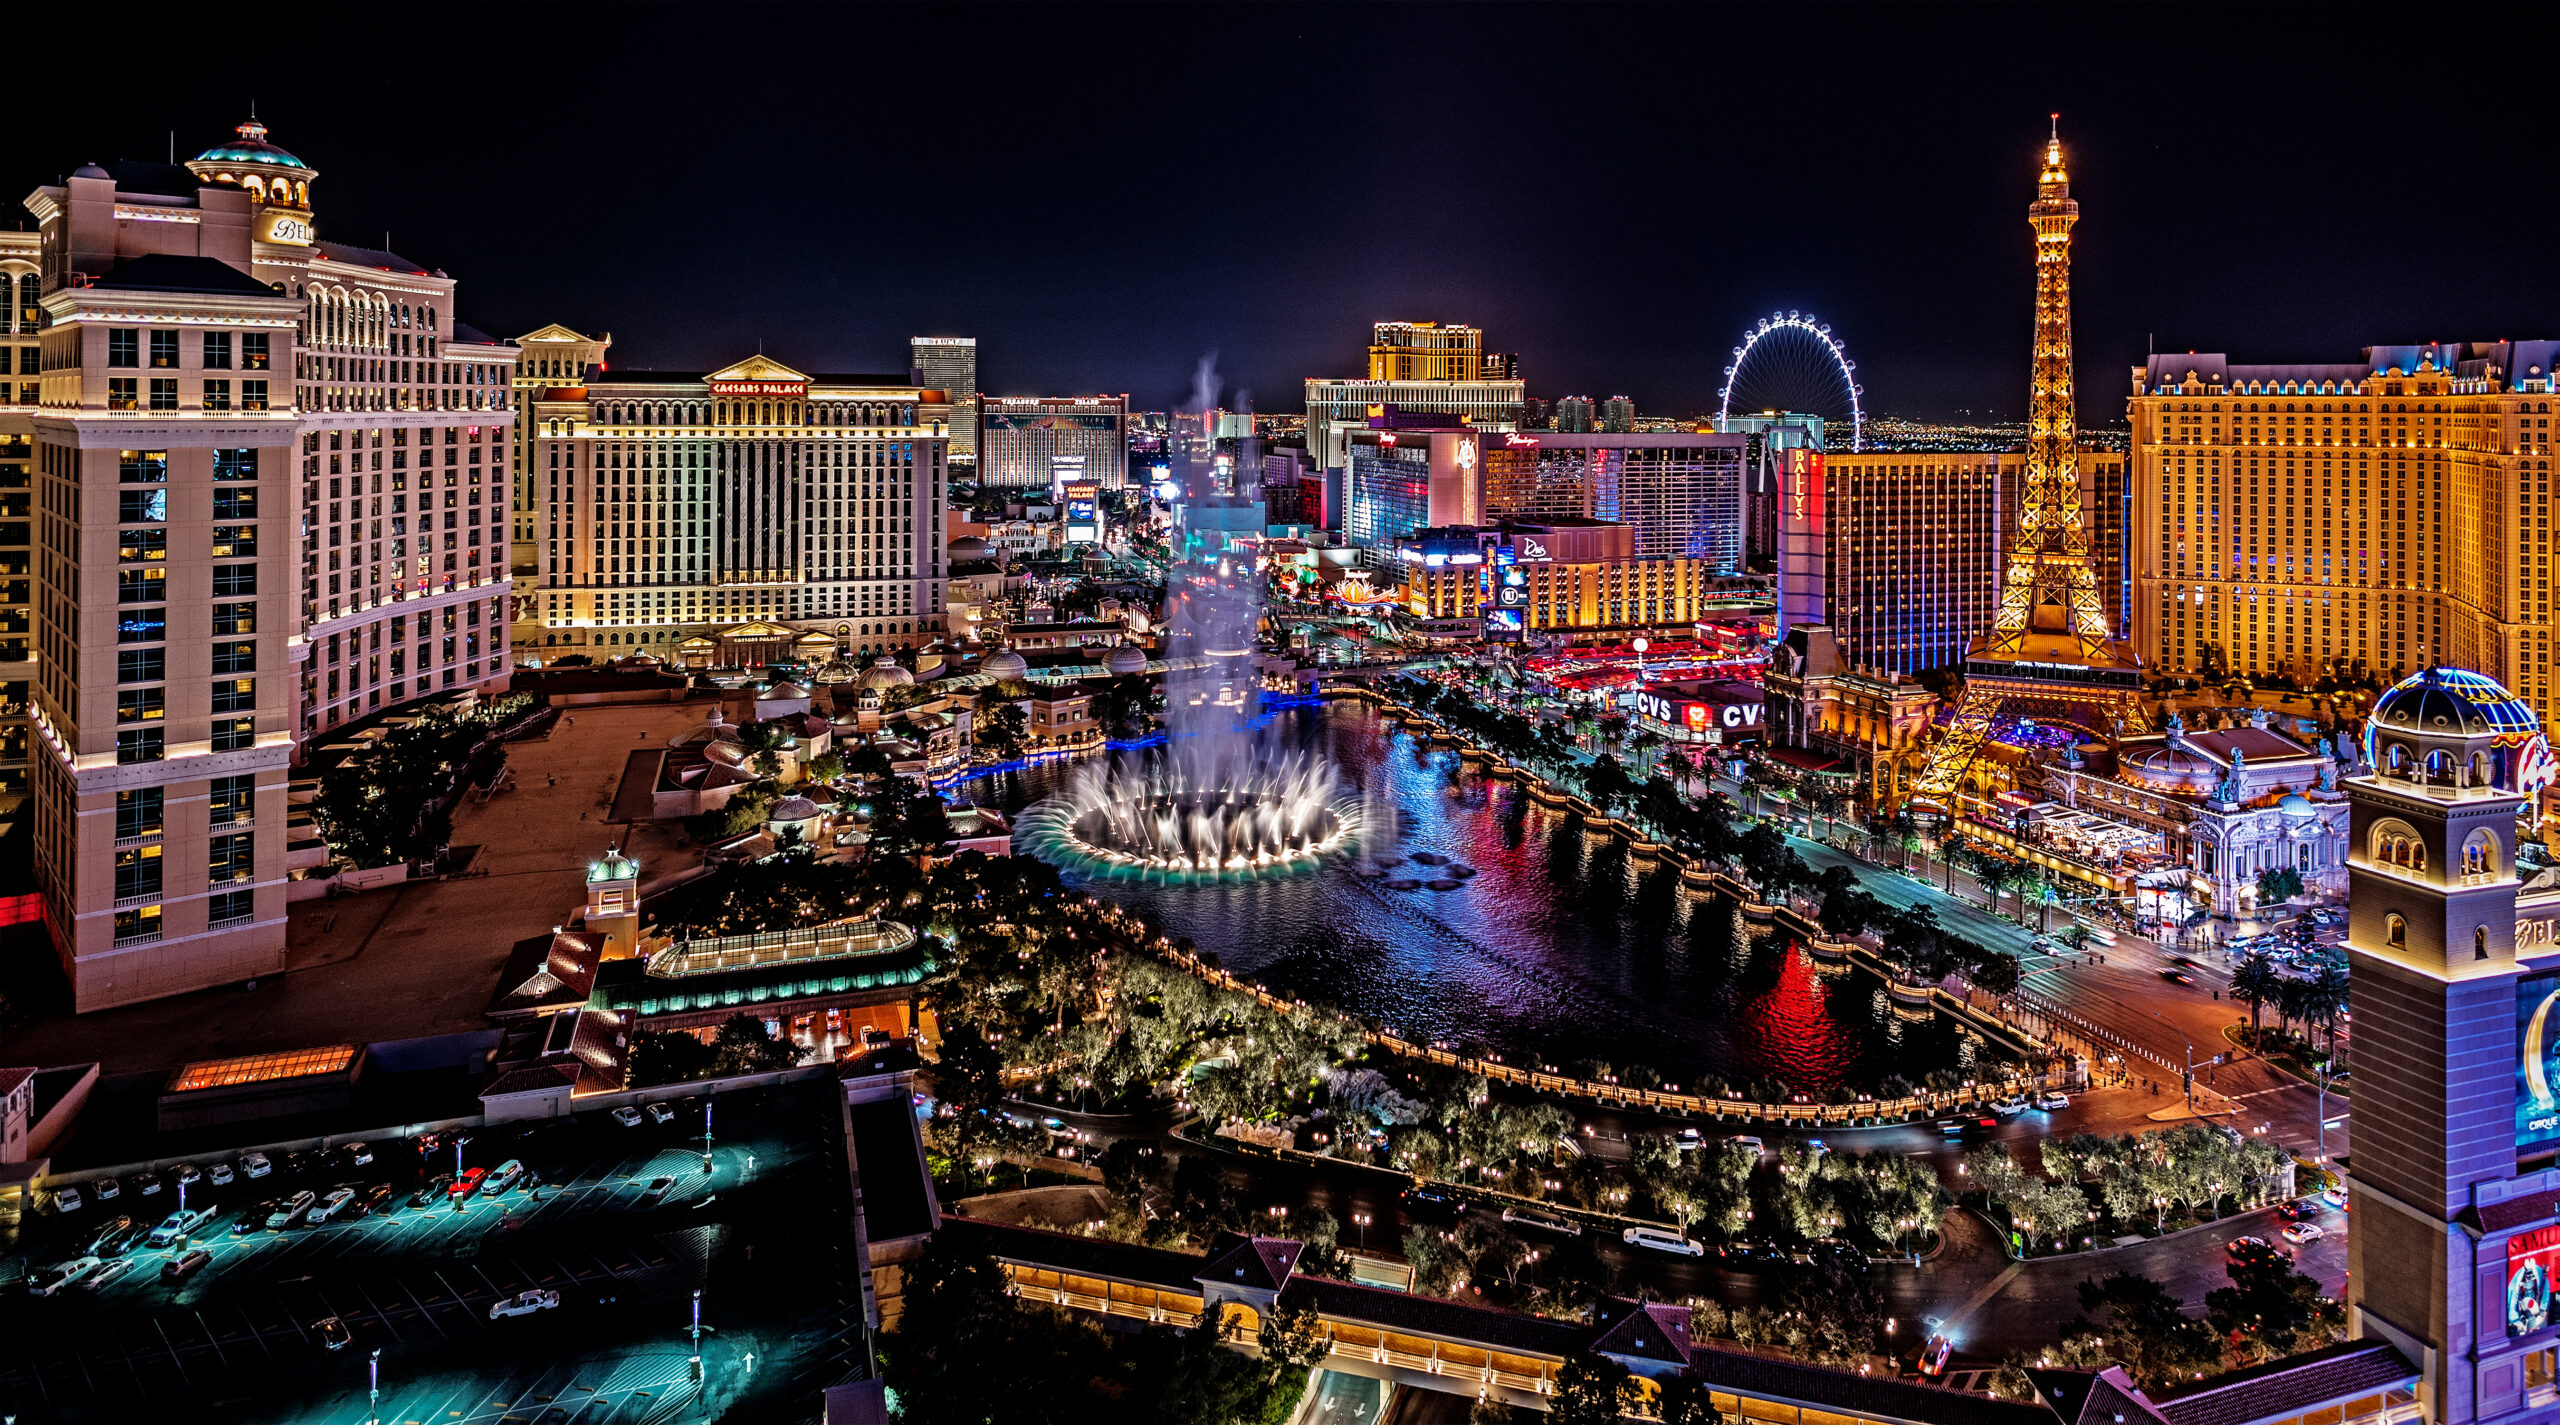 Photo of the Las Vegas strip at night - Pop Culture Allusions